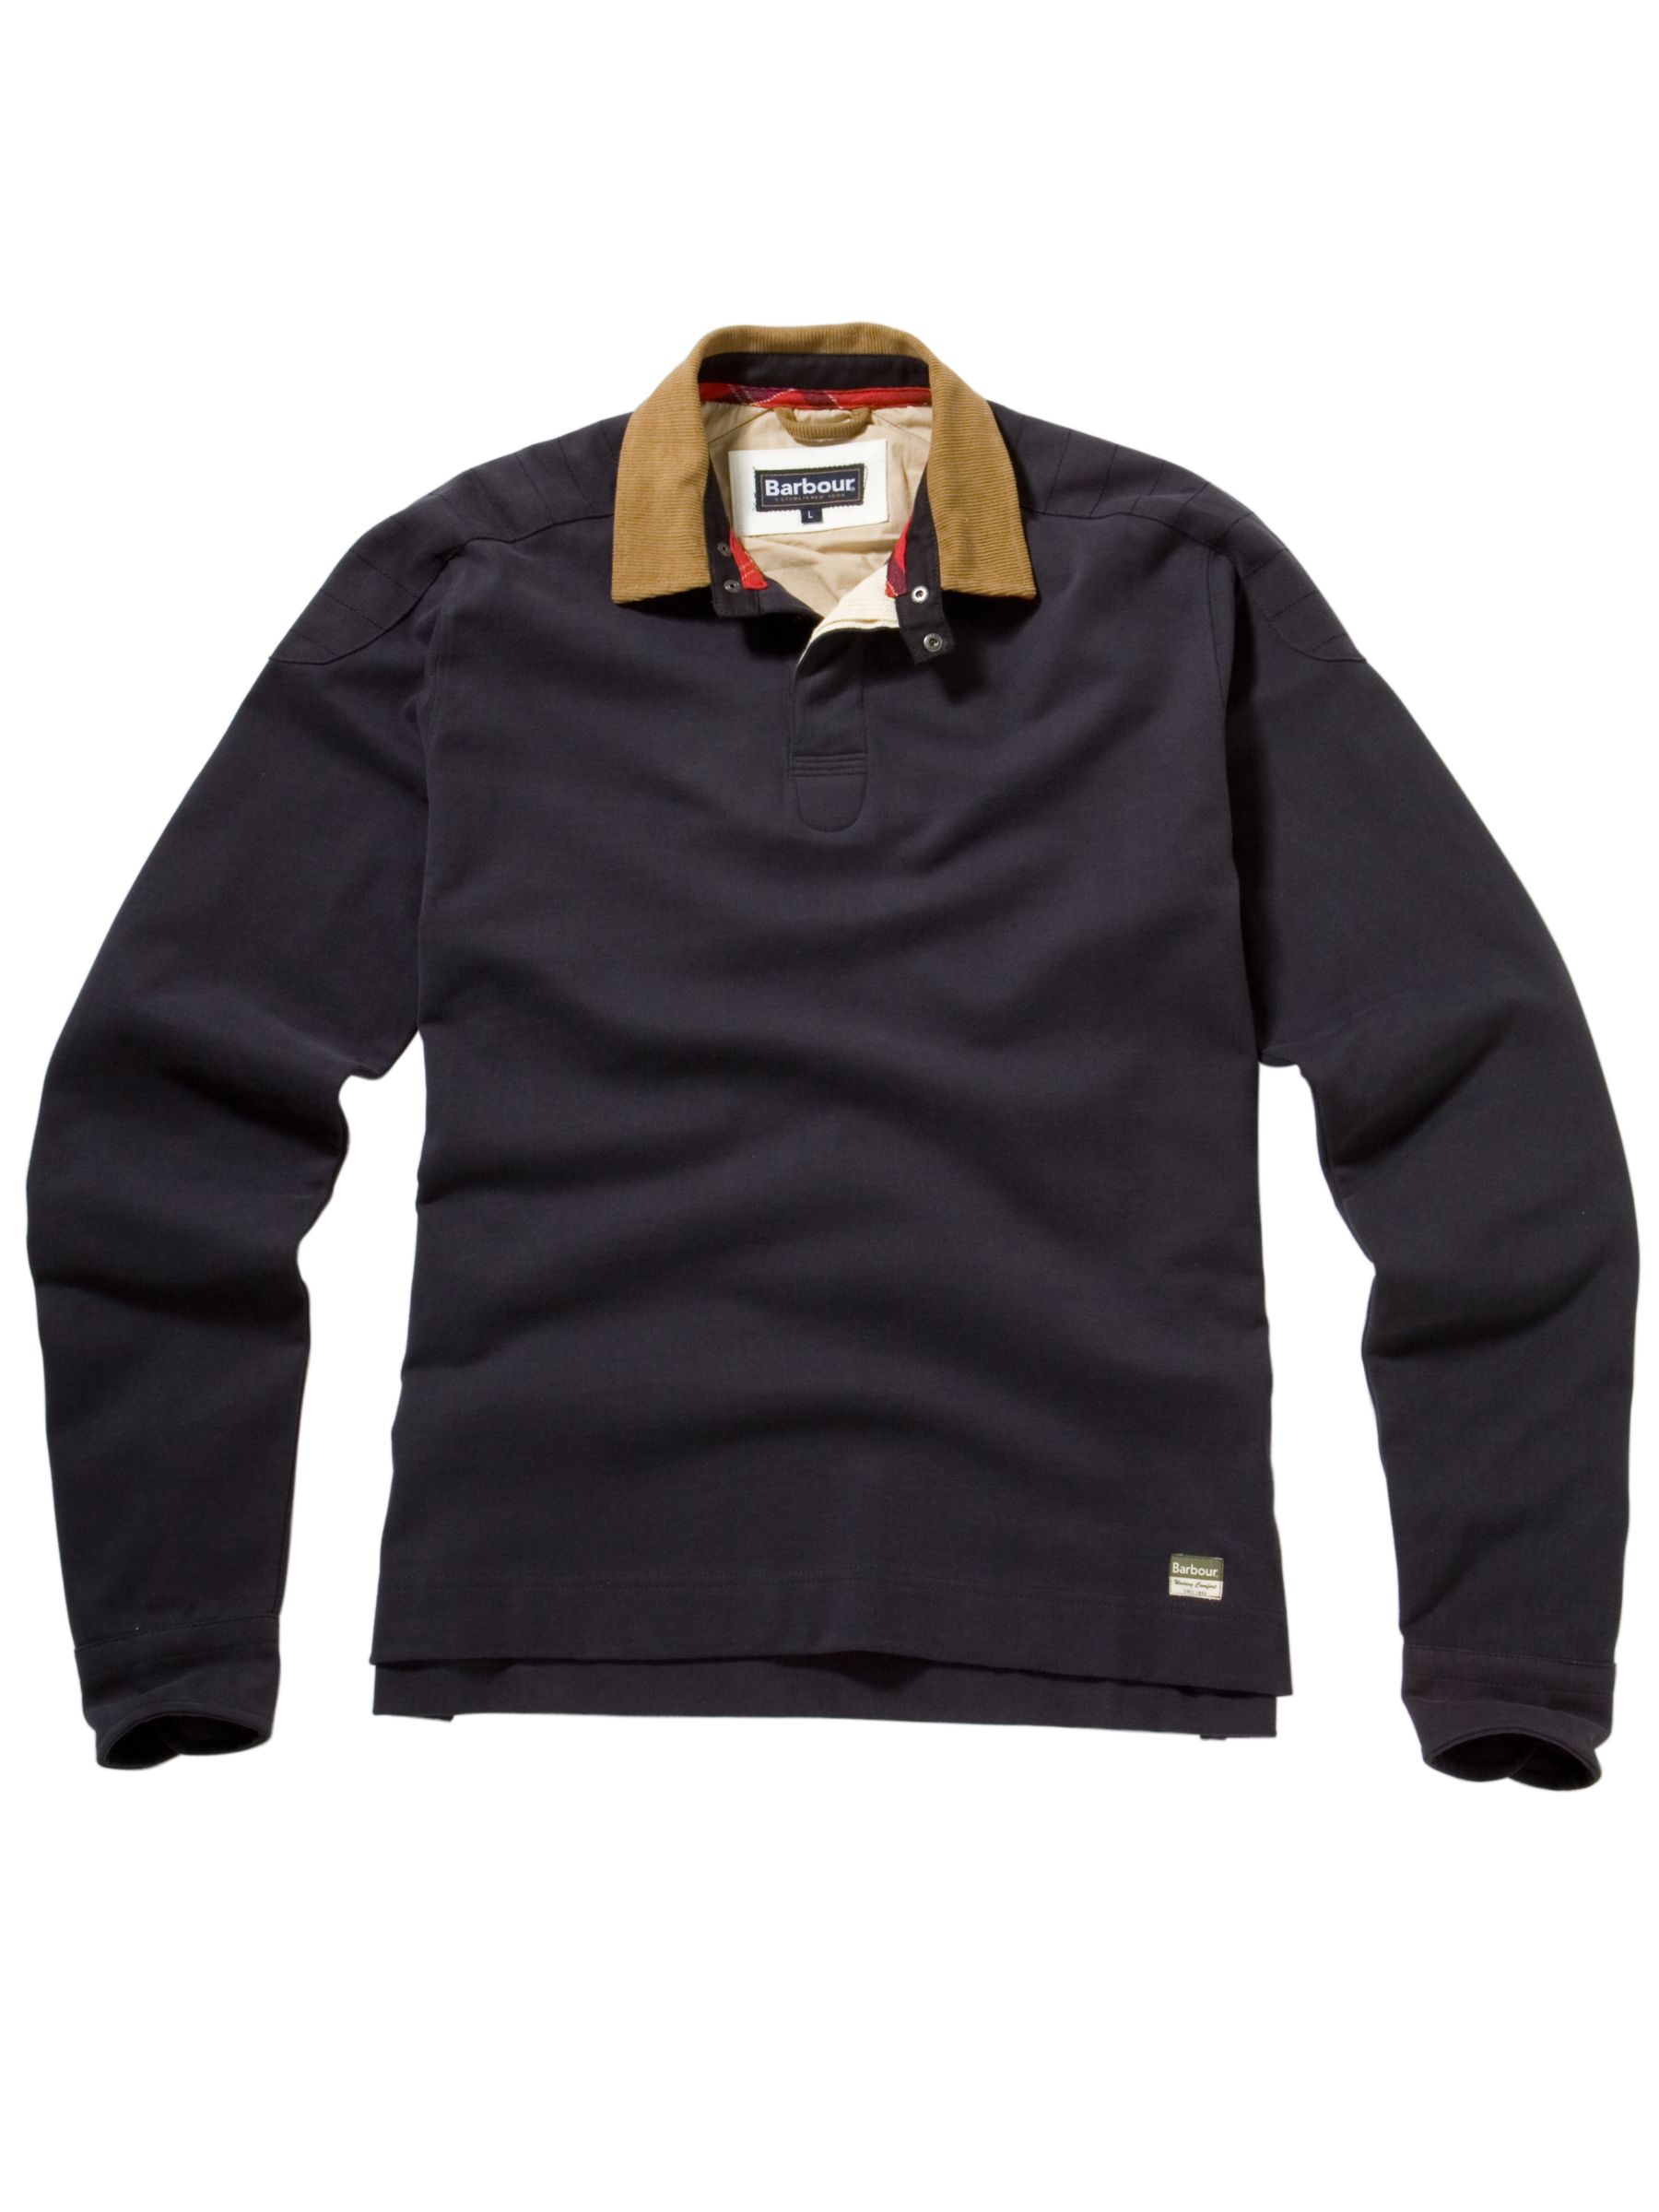 Barbour Eagle Long Sleeve Rugby Shirt, Navy